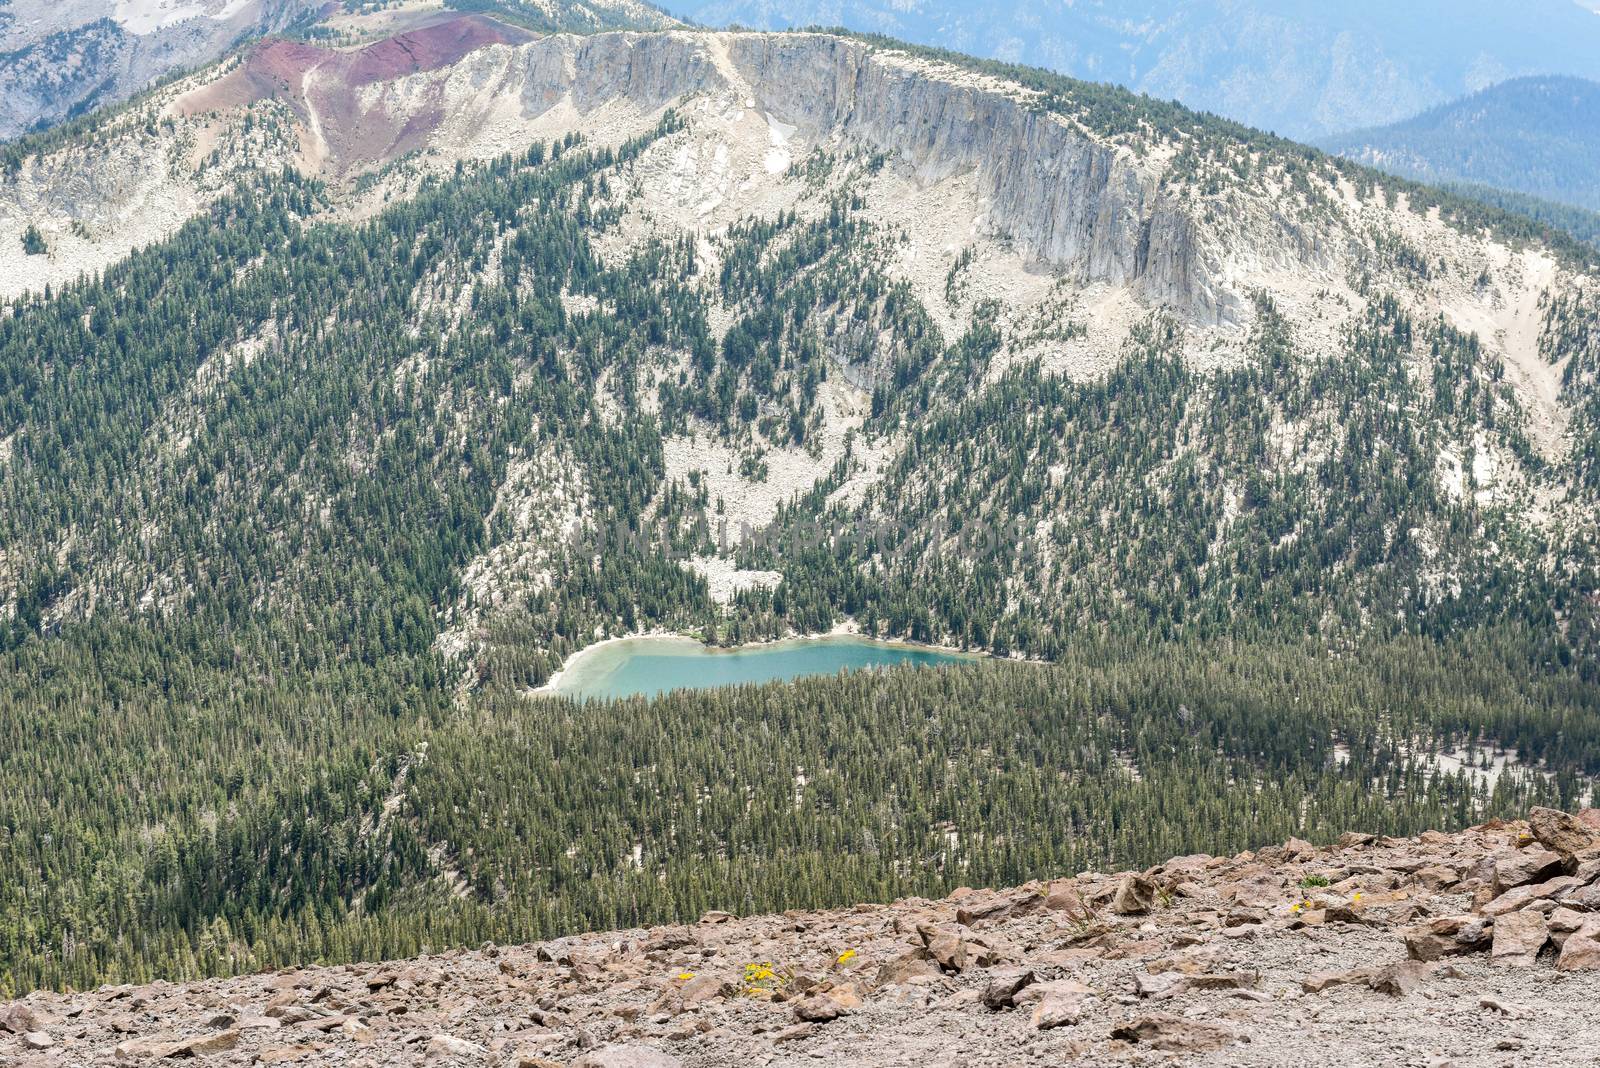 Looking down on a valley with the sub-alpine McLeod Lake from the top of Mammoth Mountain, California